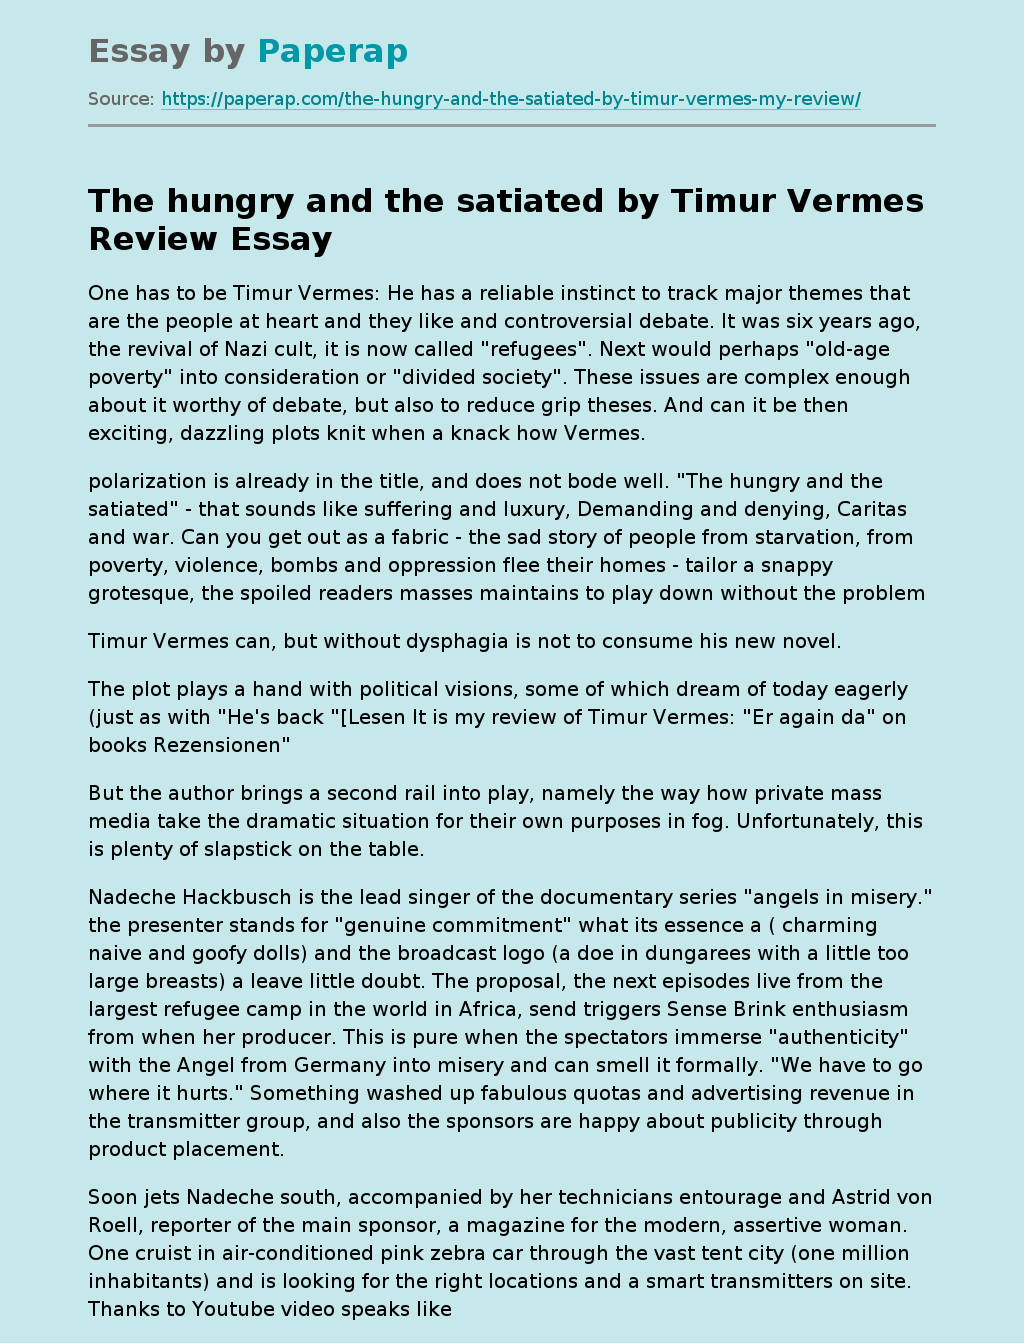 The hungry and the satiated by Timur Vermes Review